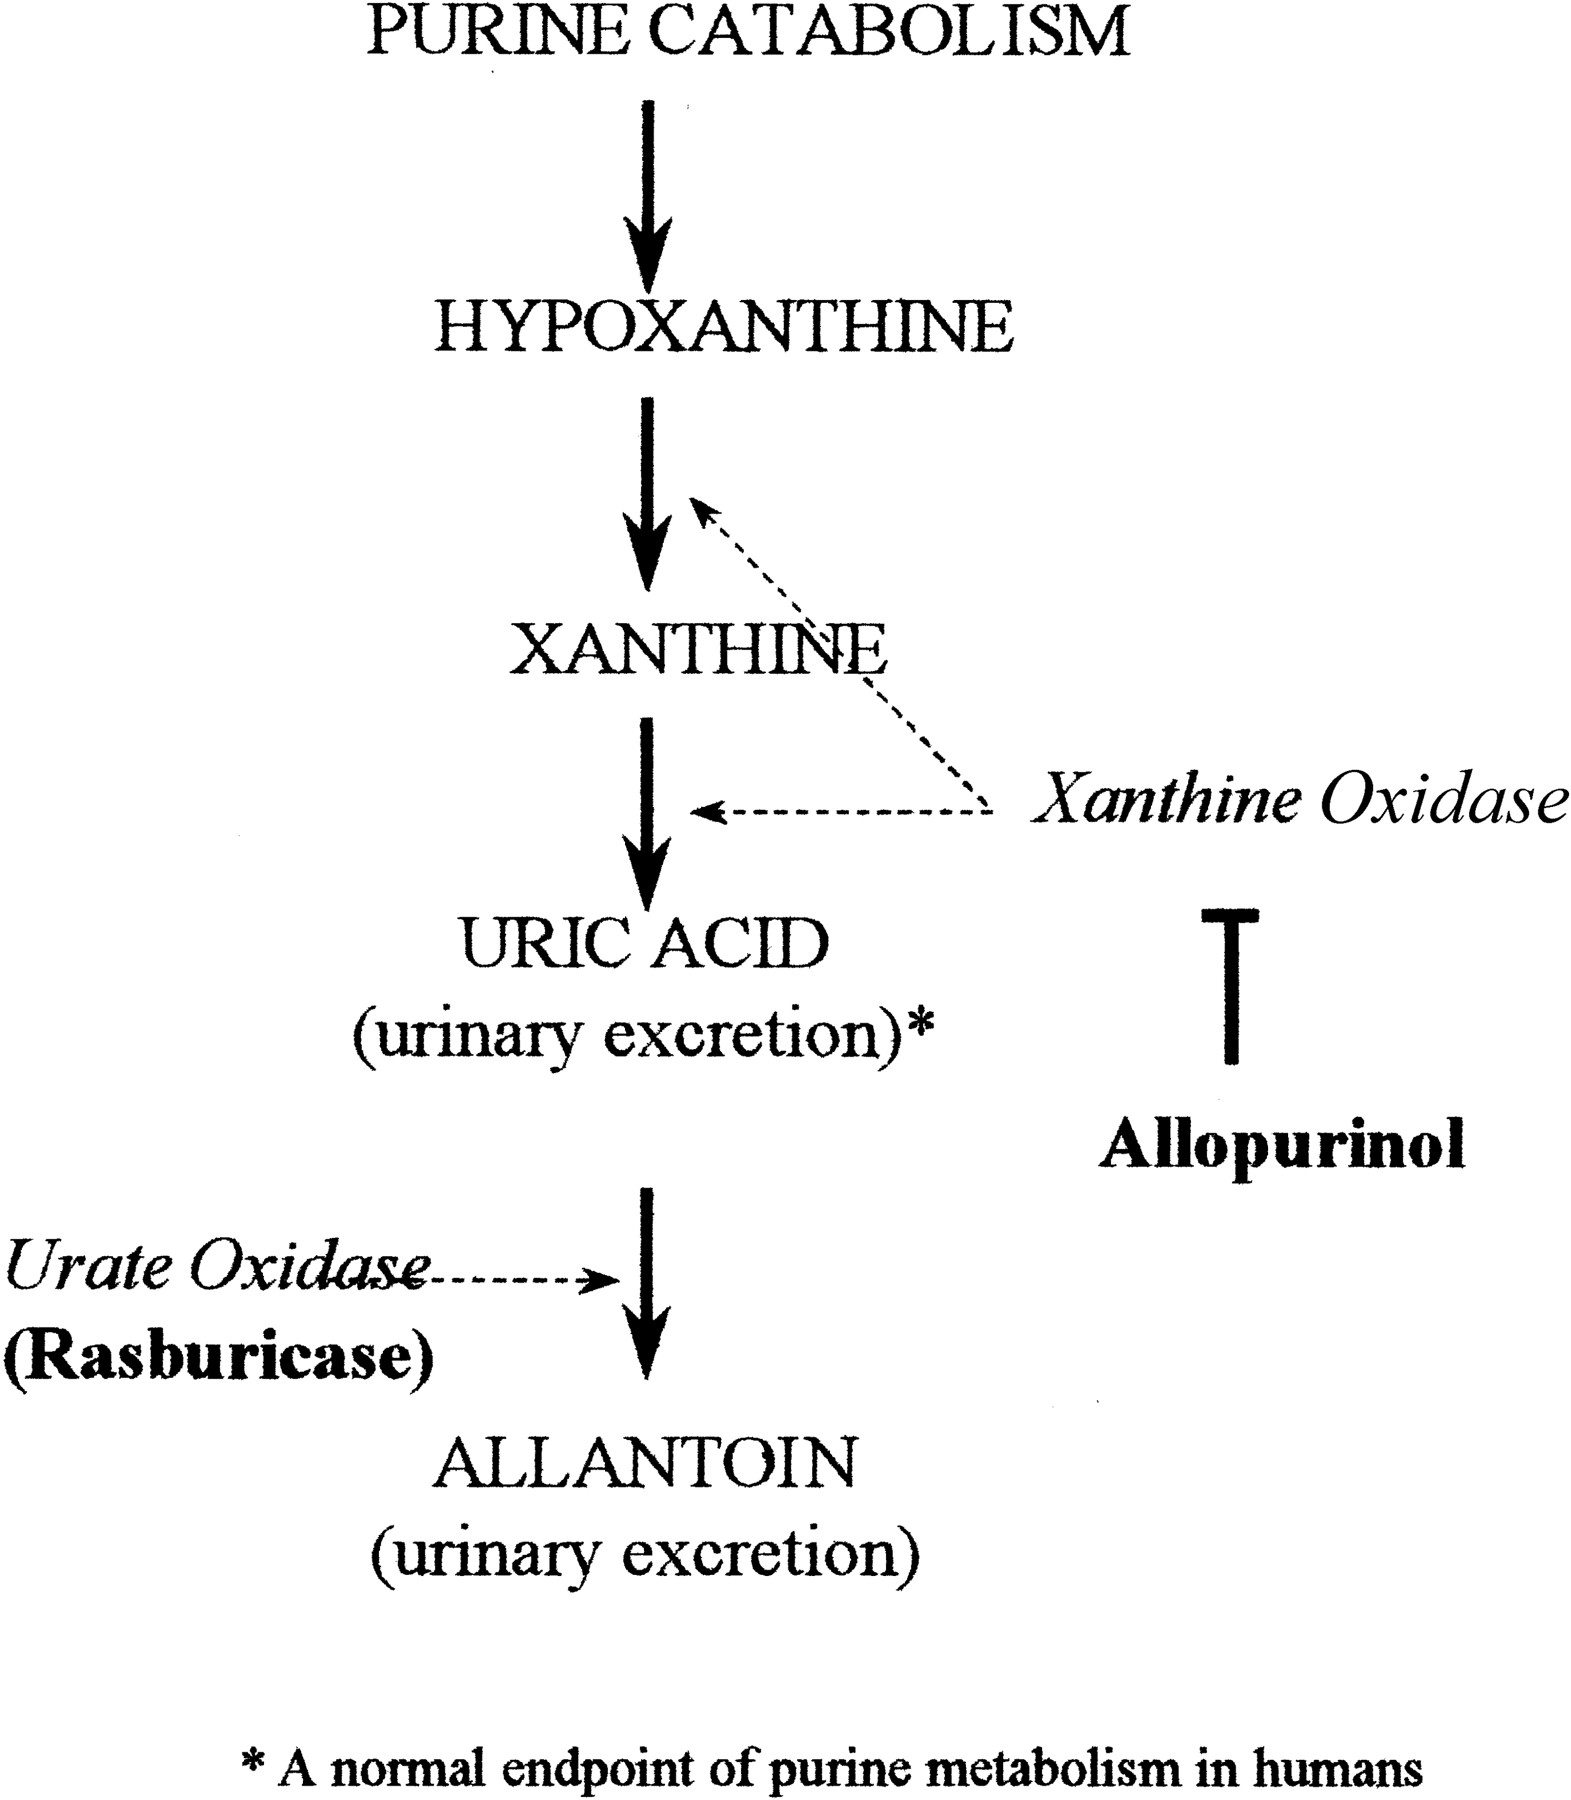 Relevant metabolic pathway for rasburicase mechanism of action (source)